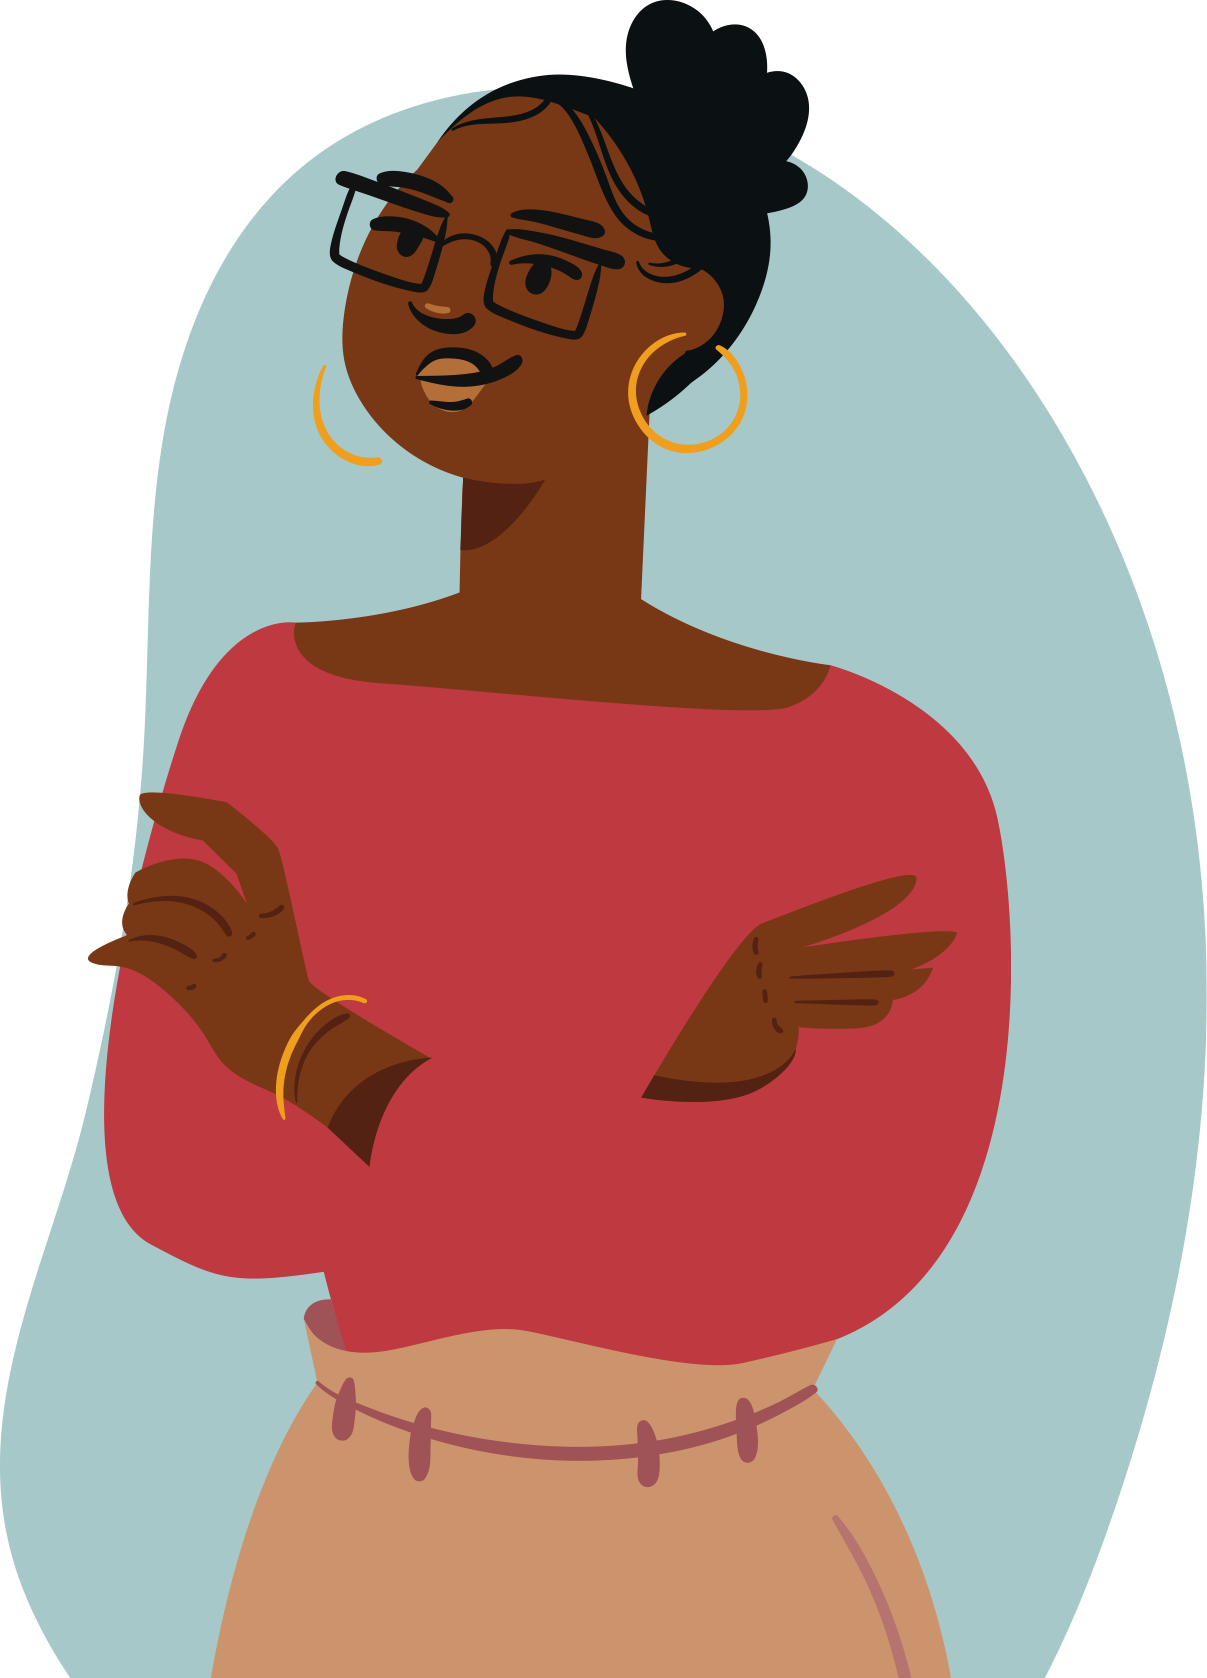 Illustrated image of a Black woman wearing a red shirt with her arms crossed. Her hair is in a bun and she is wearing black glasses.